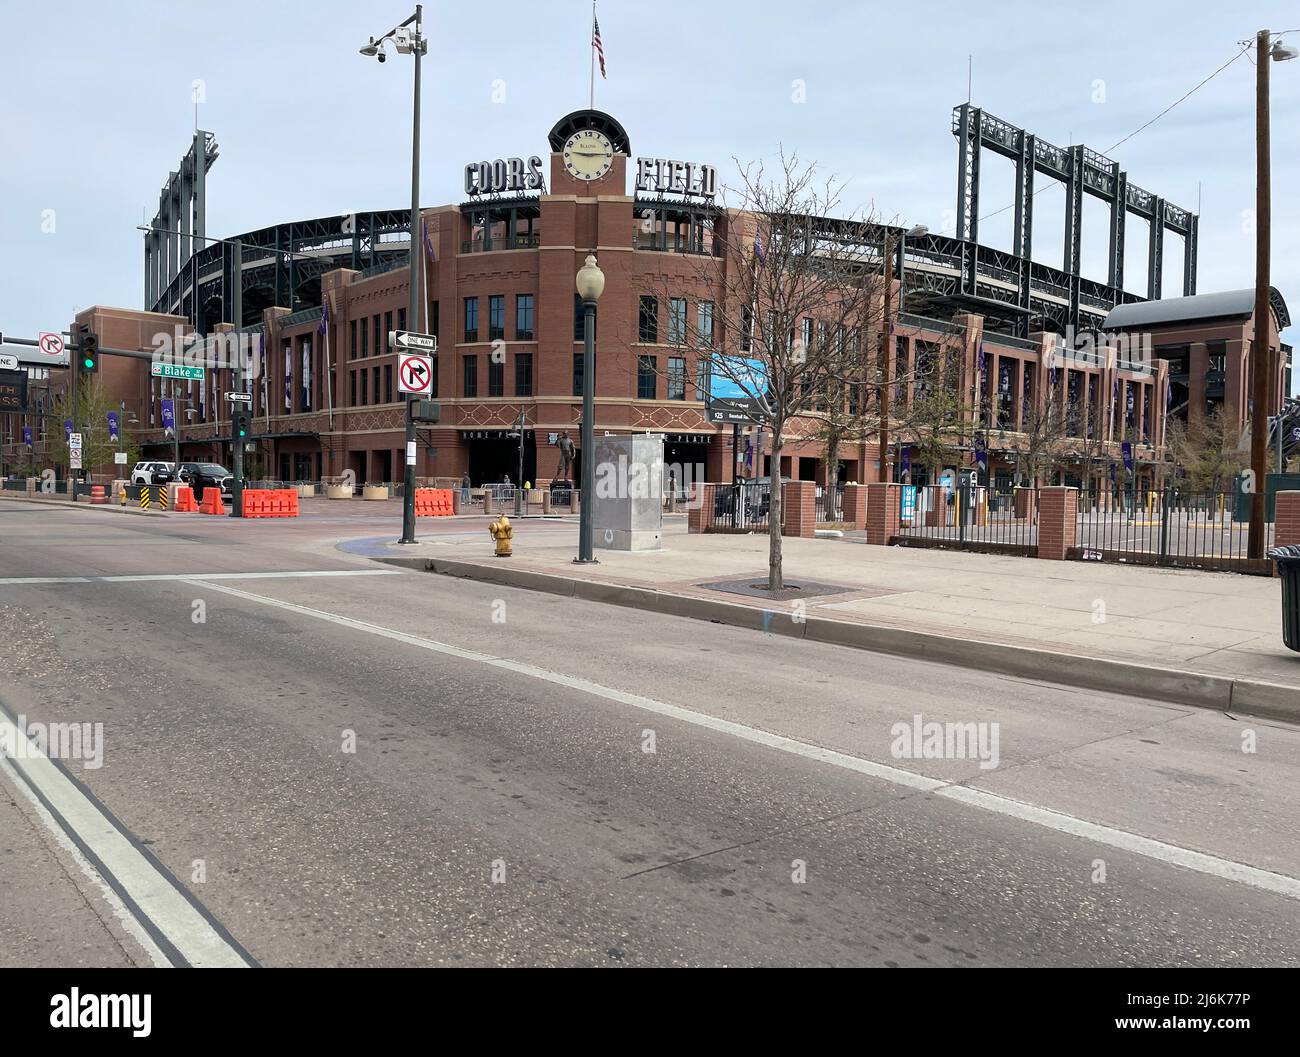 Coors Field home of the MLB Denver Rockies baseball team in Denver, Co Stock Photo